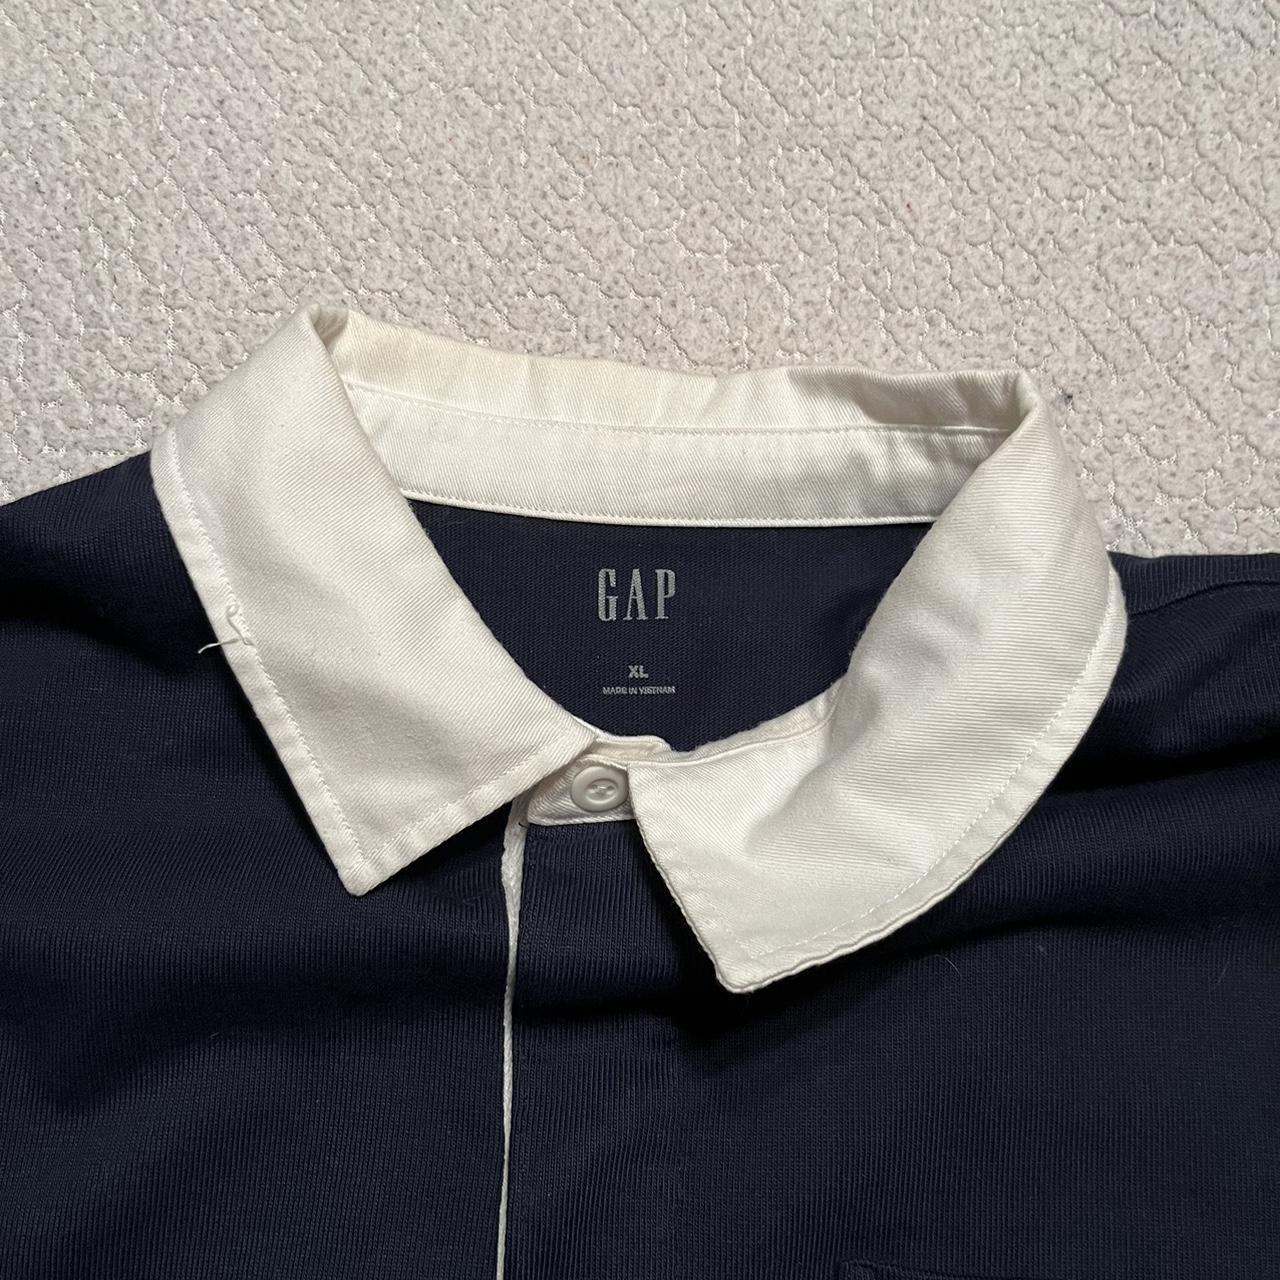 the coolest navy blue GAP rugby style shirt with a... - Depop